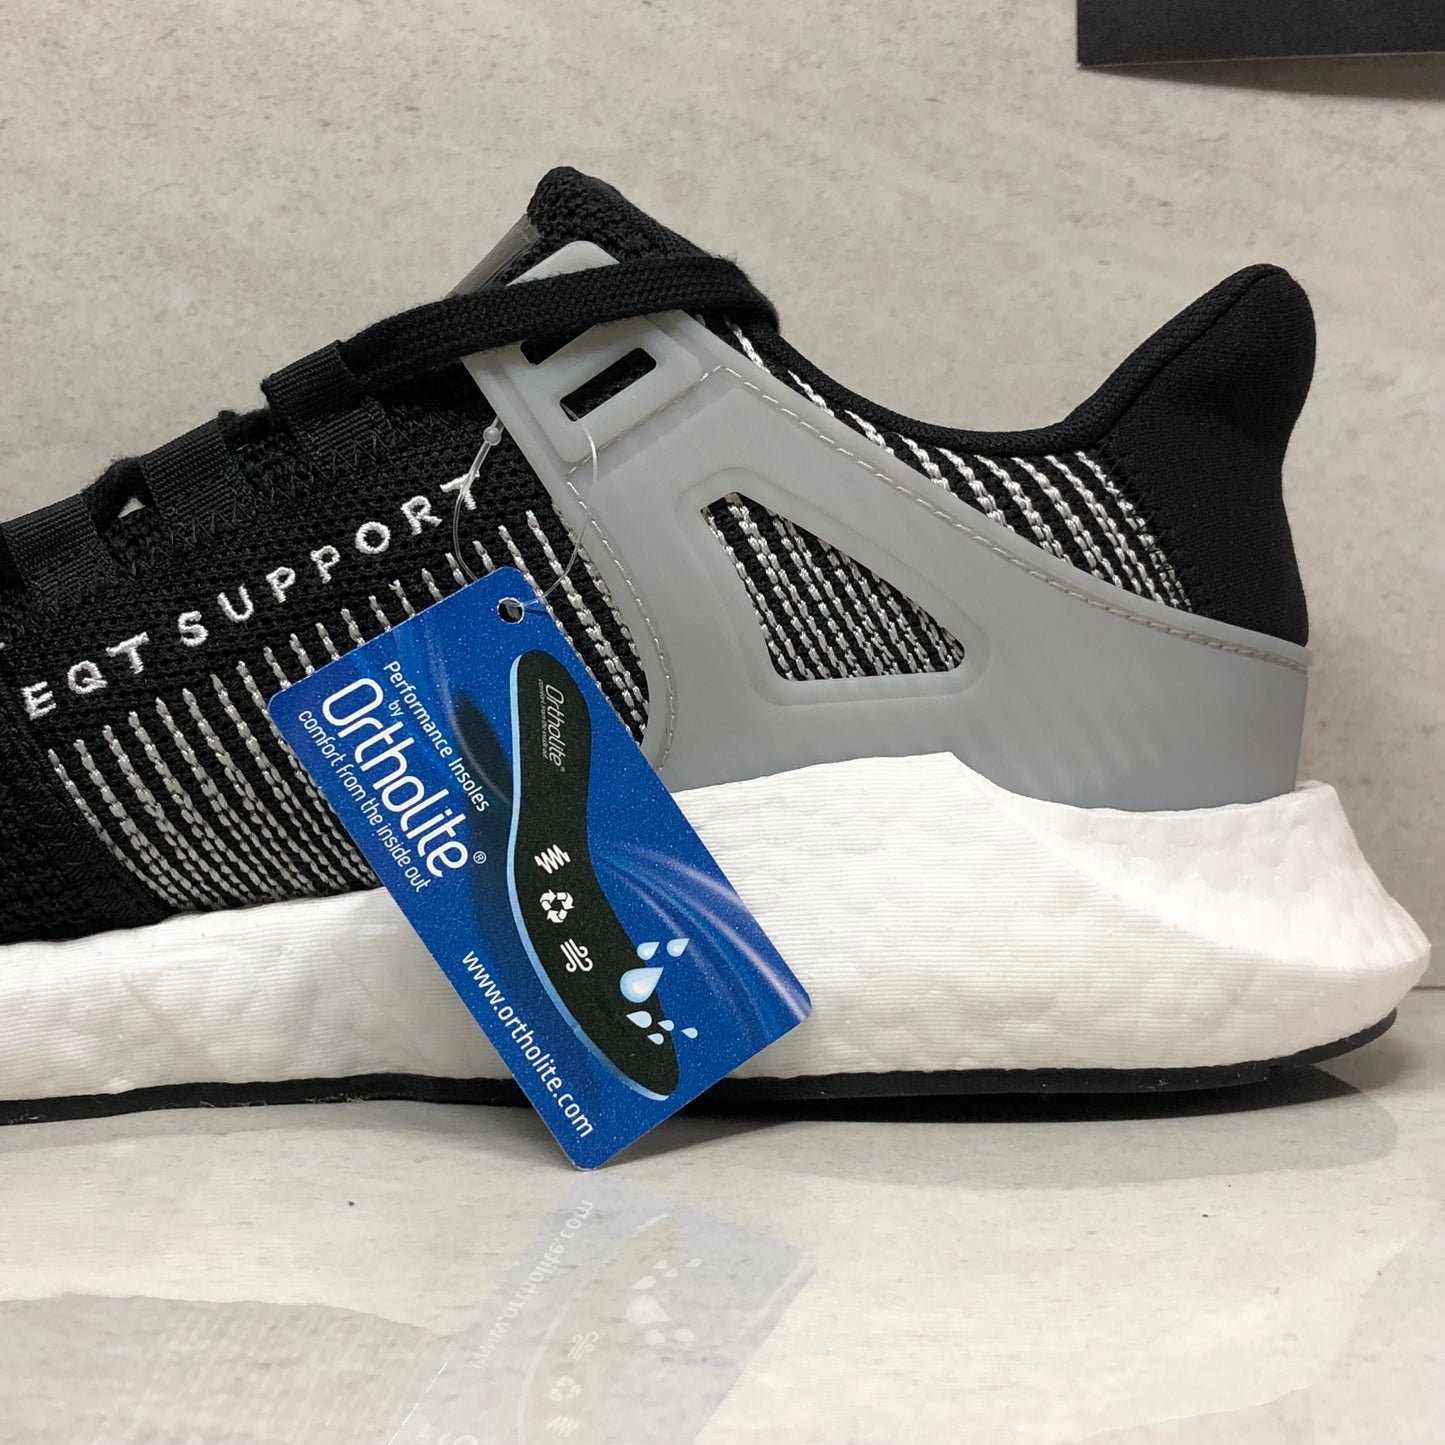 DS Adidas EQT Support 93/17 Taille 13 Noir BY9509